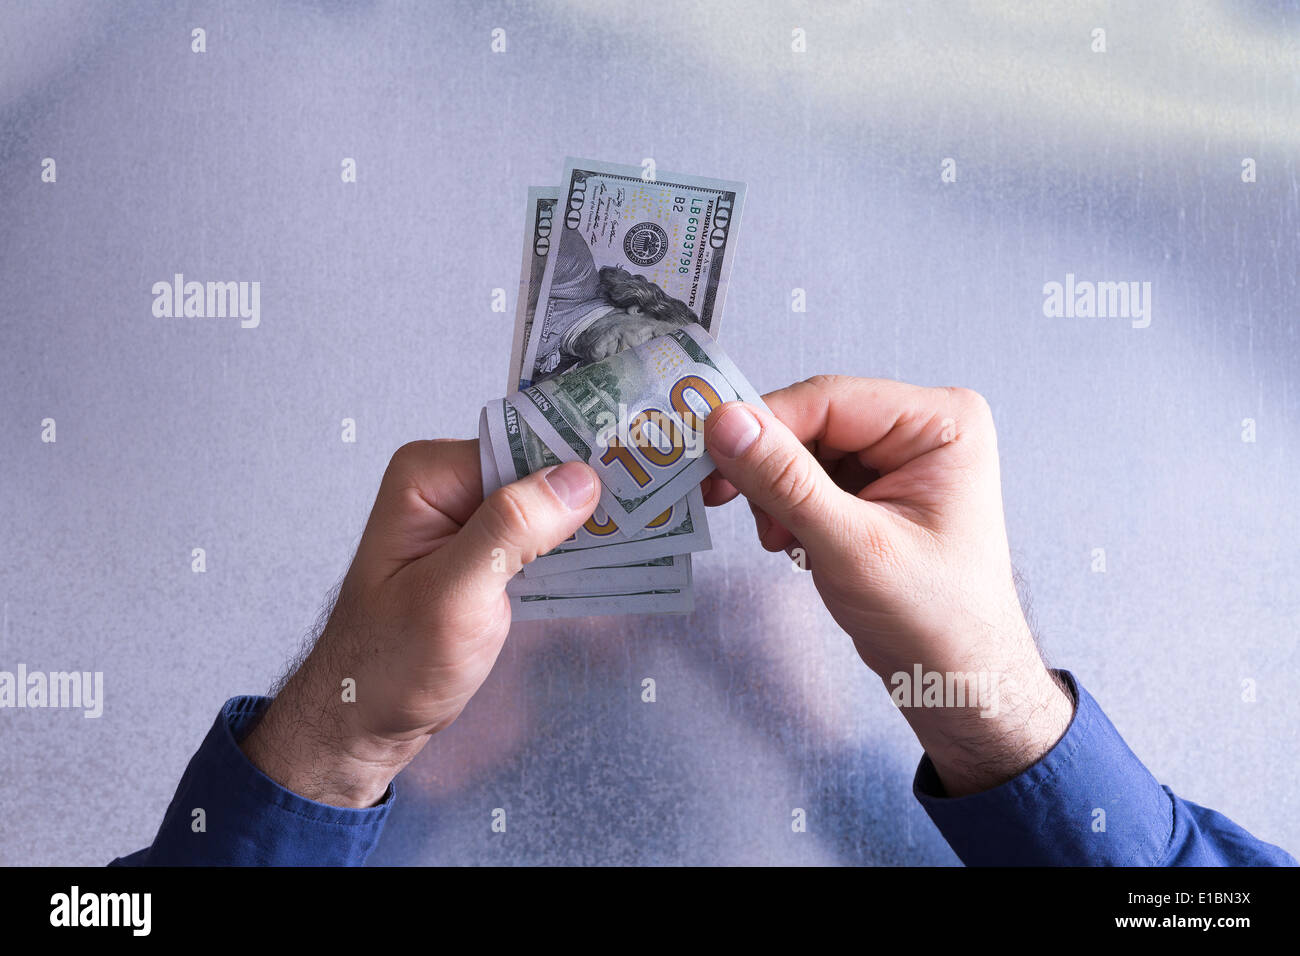 Man counting or paying out 100 dollar bills in a financial and monetary concept viewed from above with only his hands visible Stock Photo